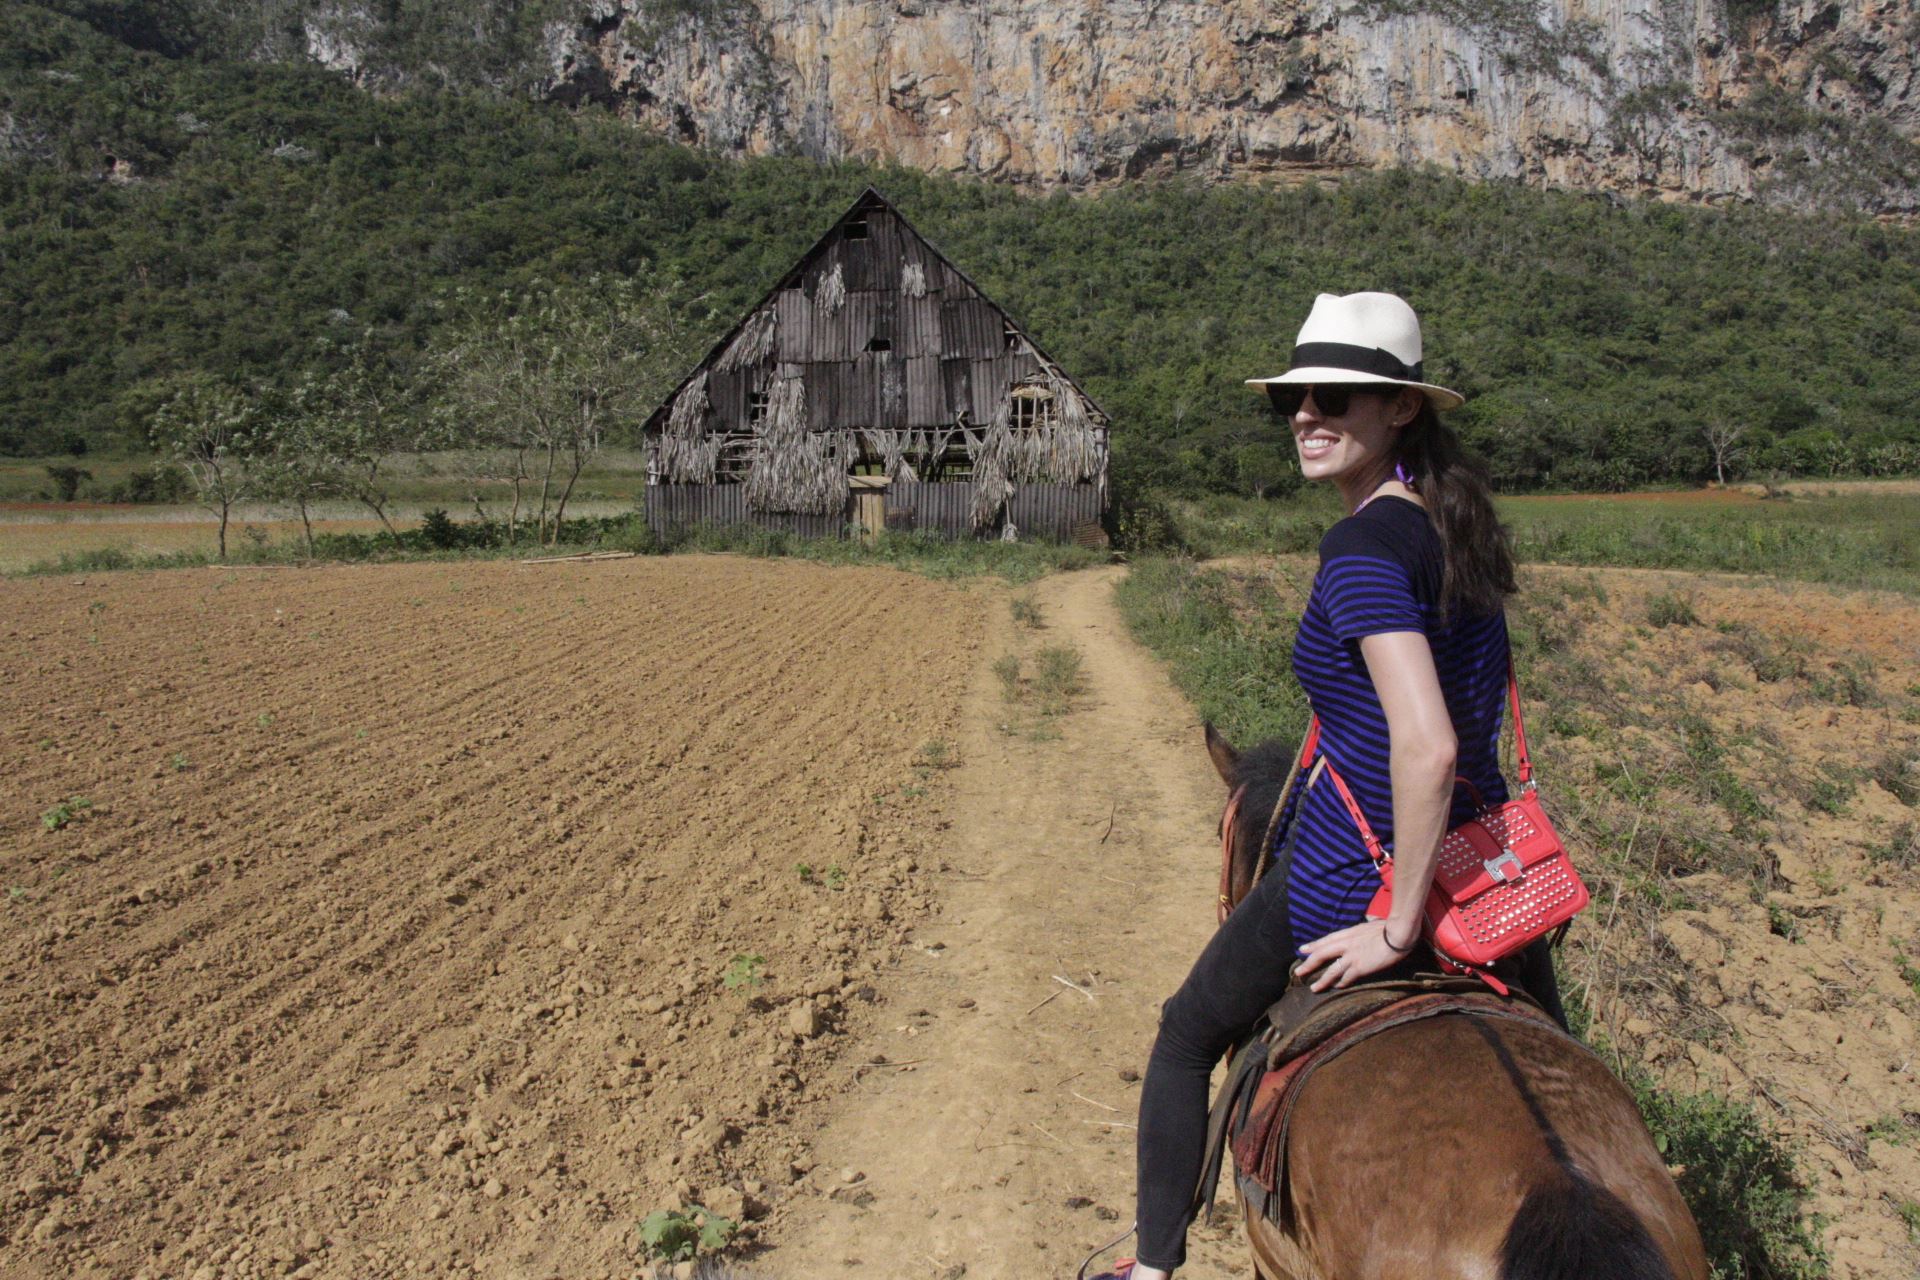   Emily on horseback is a sight to see. Of course, no one told  Rebecca Minkoff &nbsp;that her purses needed to endure a trot or gallup. Here she is approaching the "house" where farmers dry tobacco leaves.  &nbsp;  